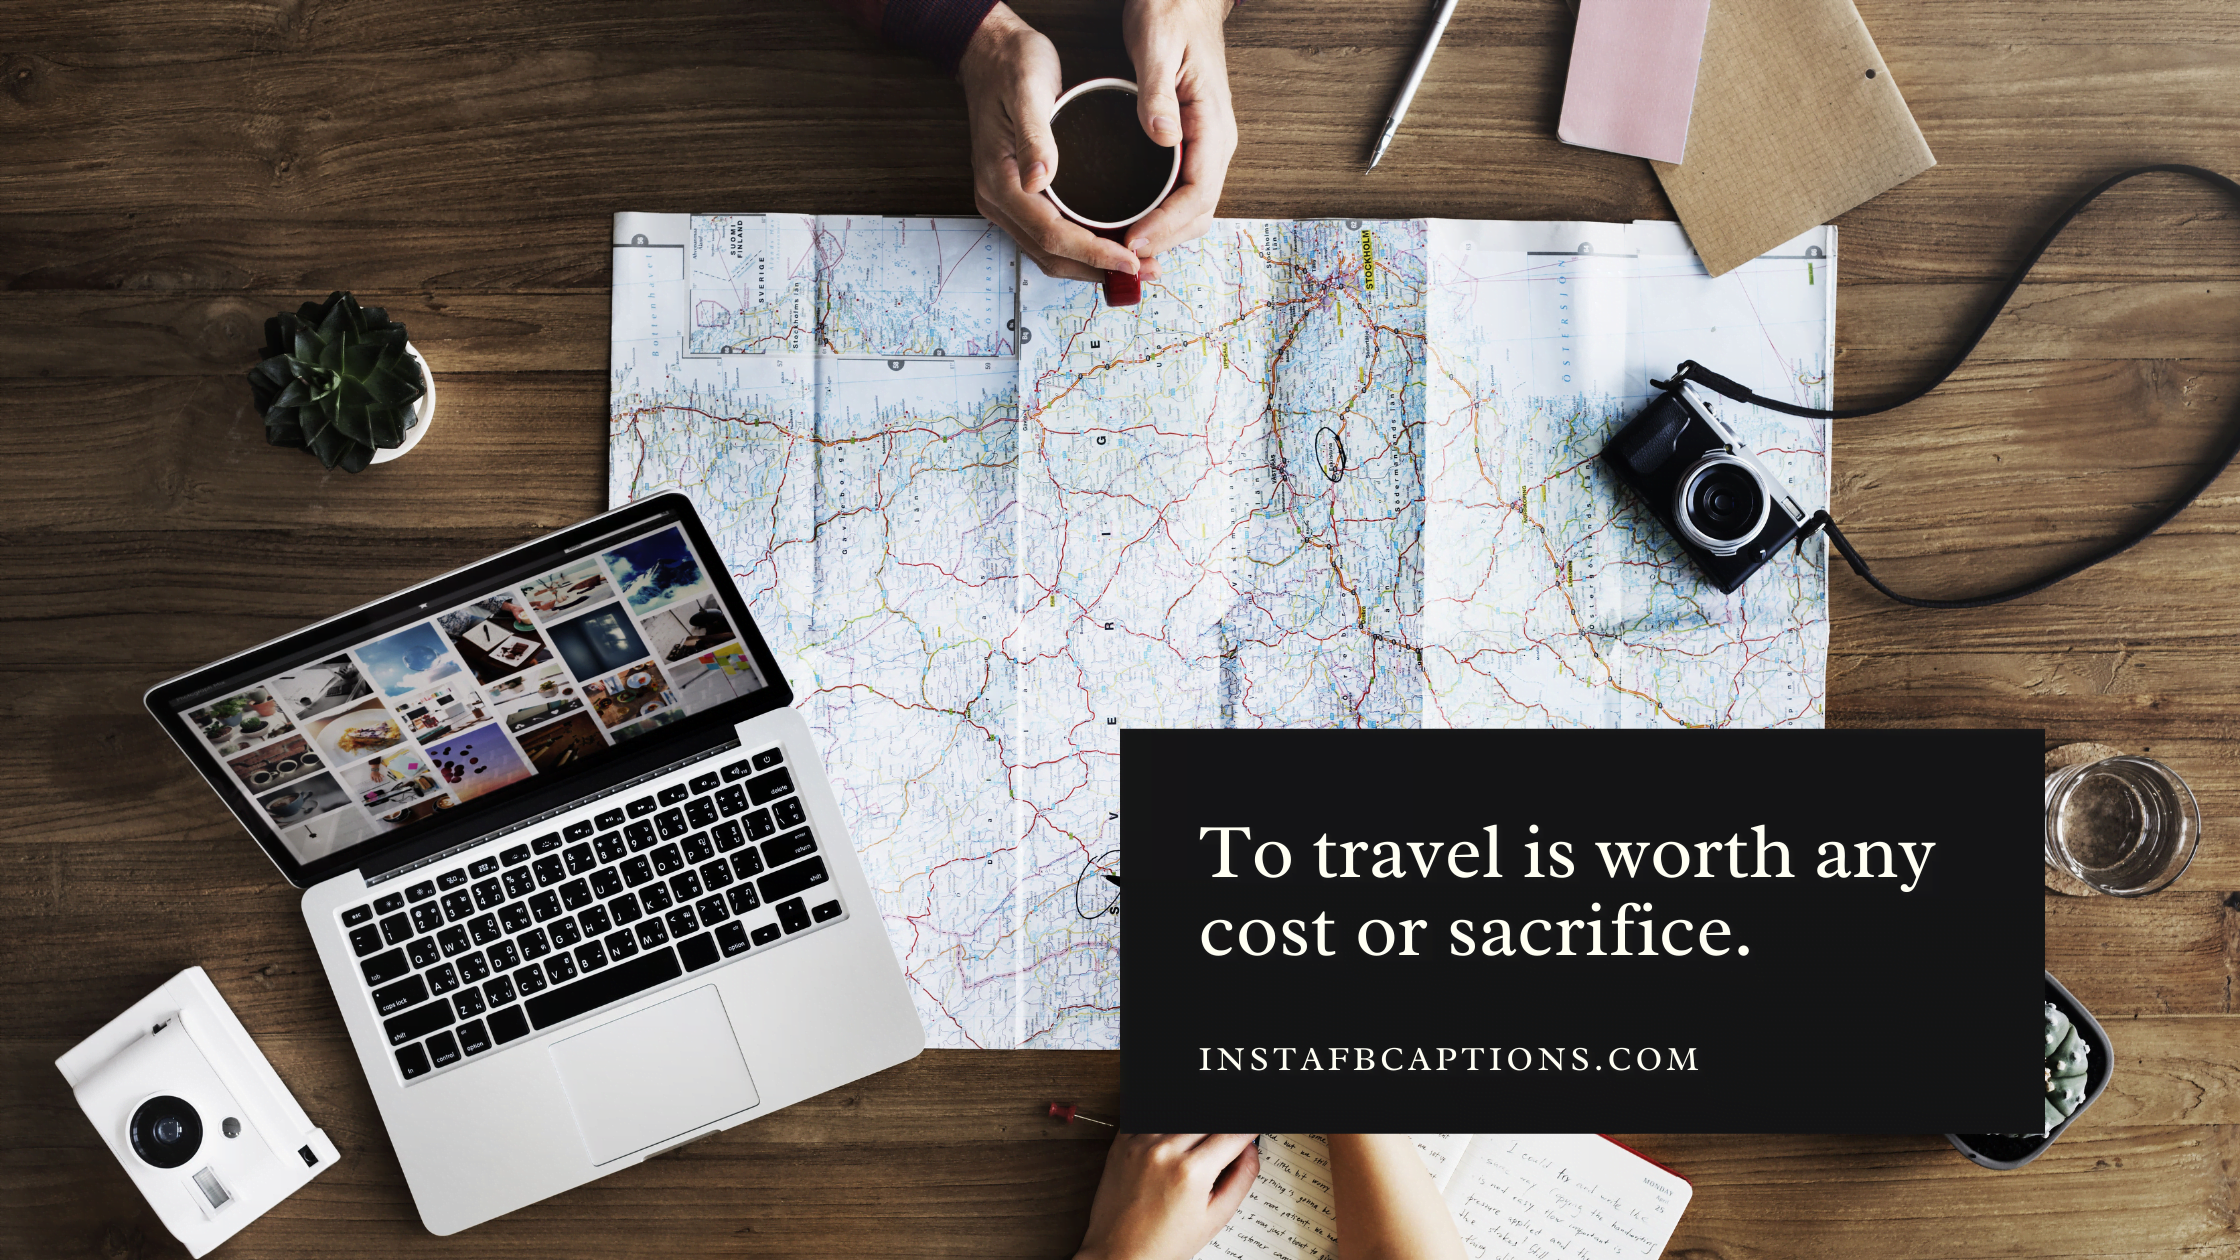 To travel is worth any cost or sacrifice travel captions for instagram - Travel Quote Captions - 130+ Best Traveling Captions For Instagram